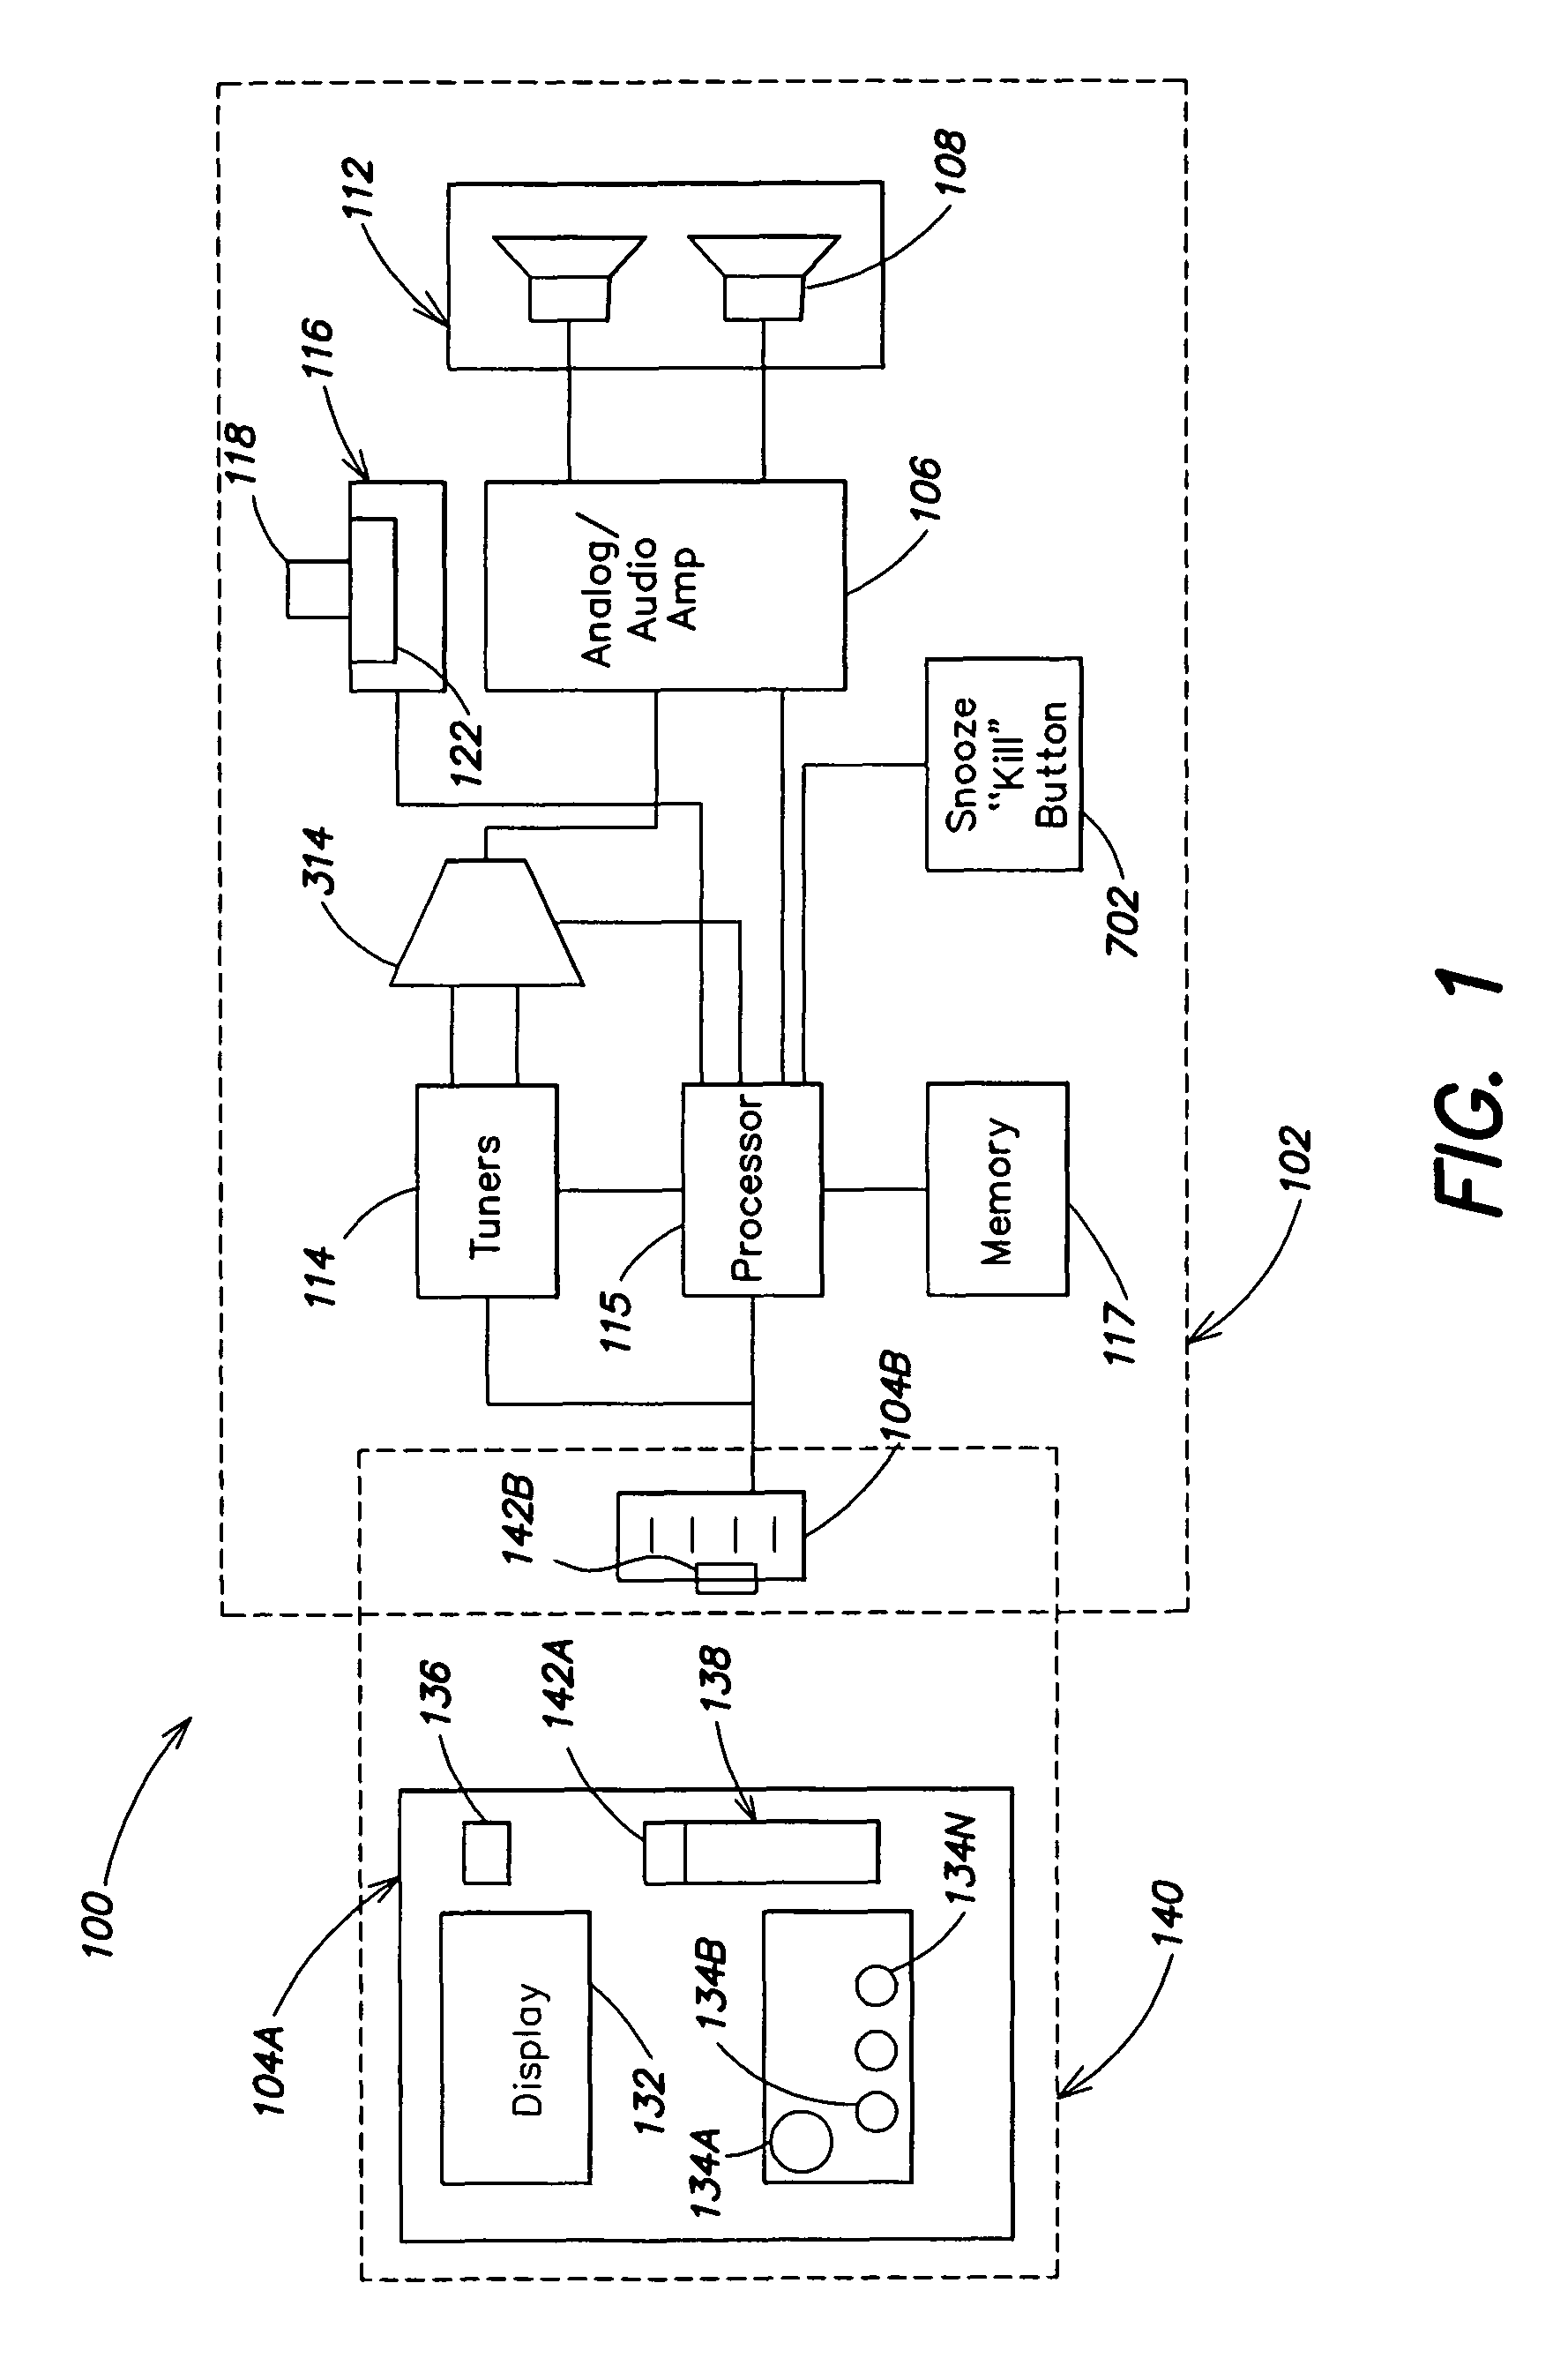 Entertainment system with bandless tuning